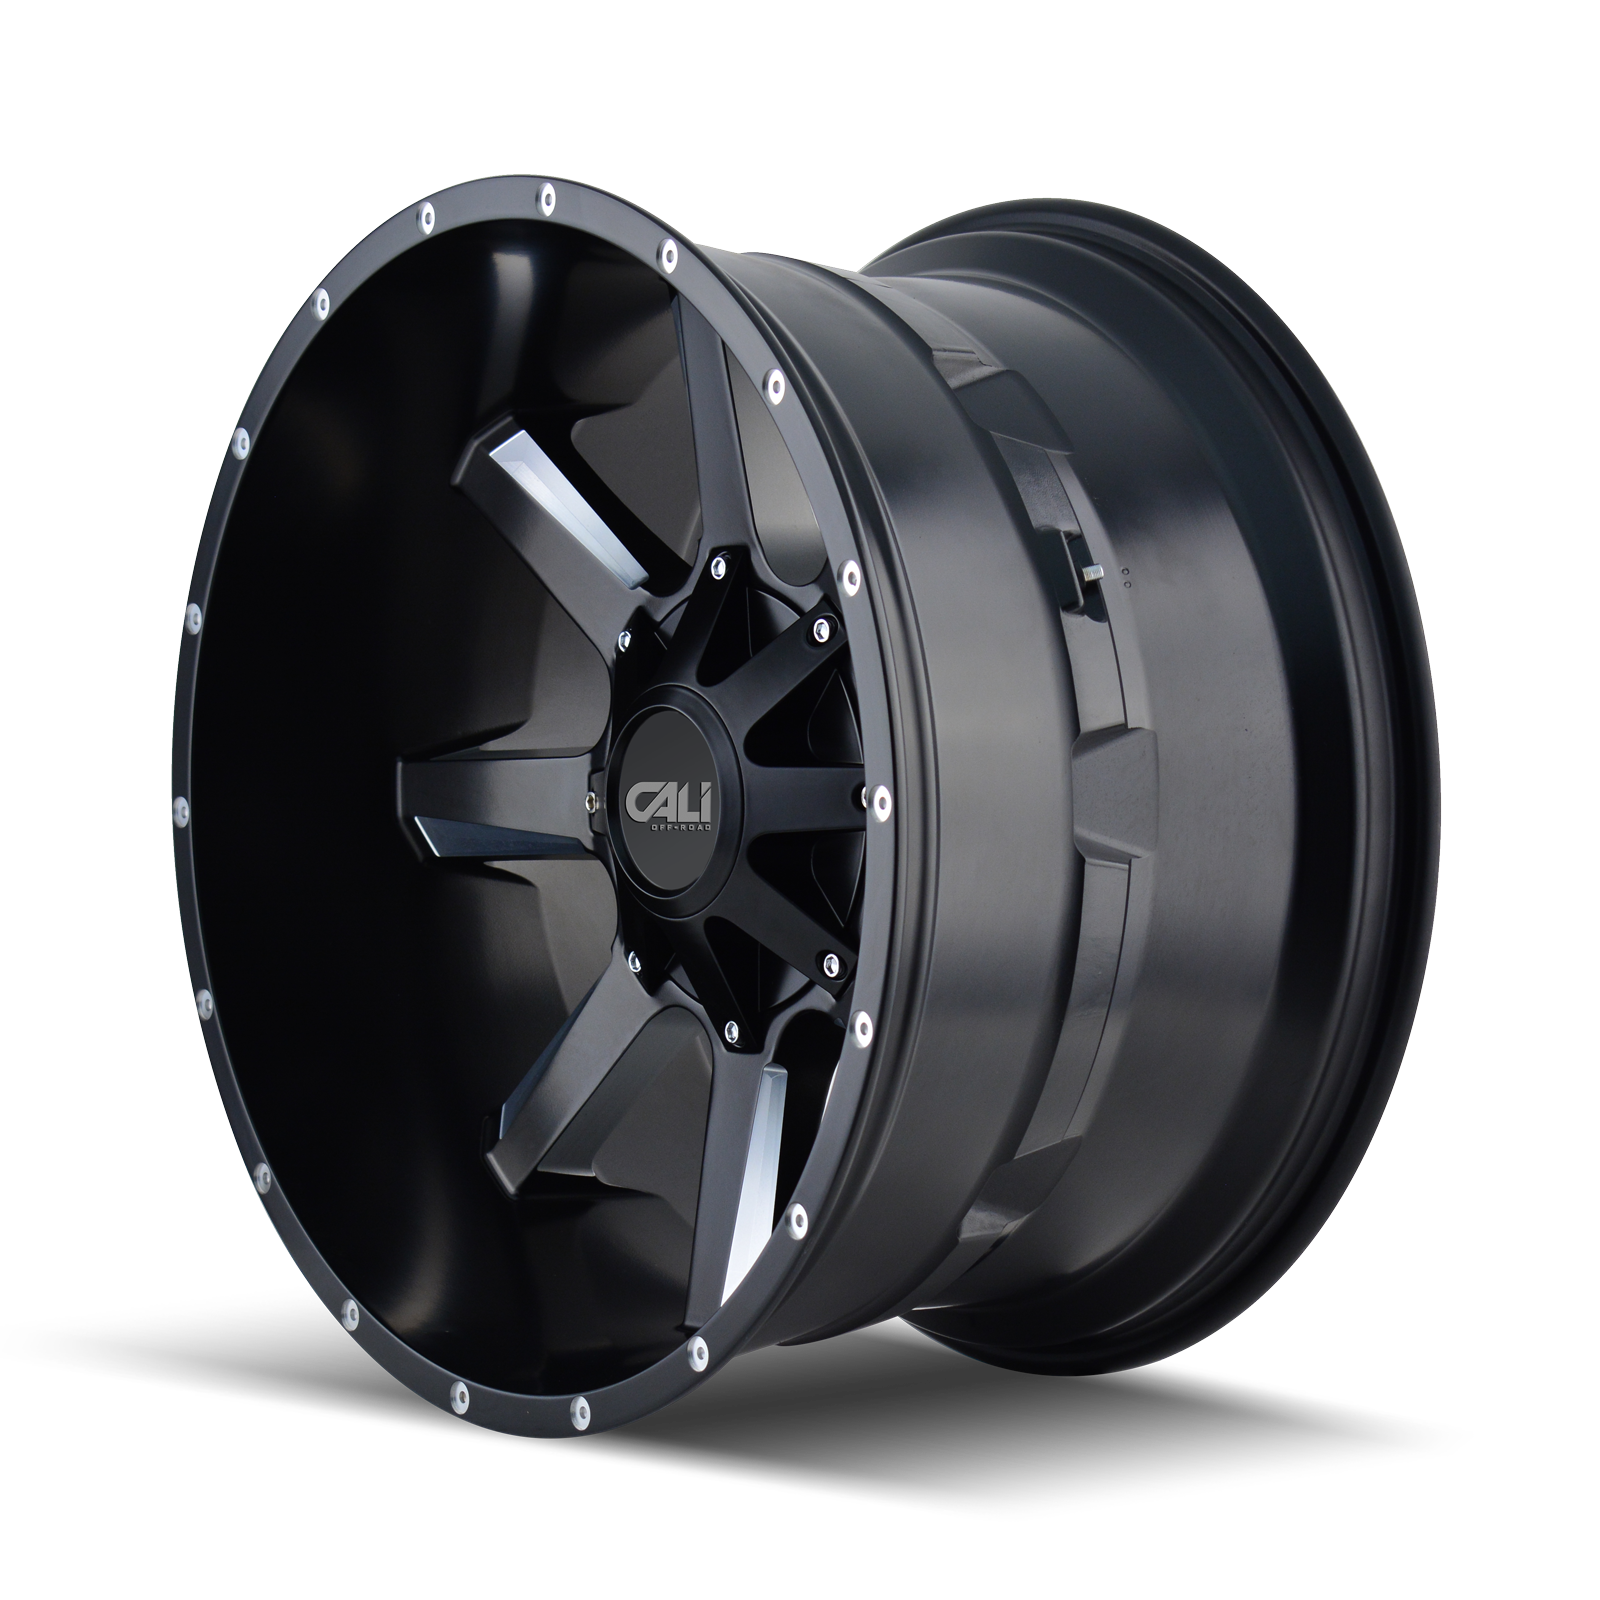 Cali Off-road BUSTED Satin black milled 22x12 -44 6x135|6x139.7mm 106mm